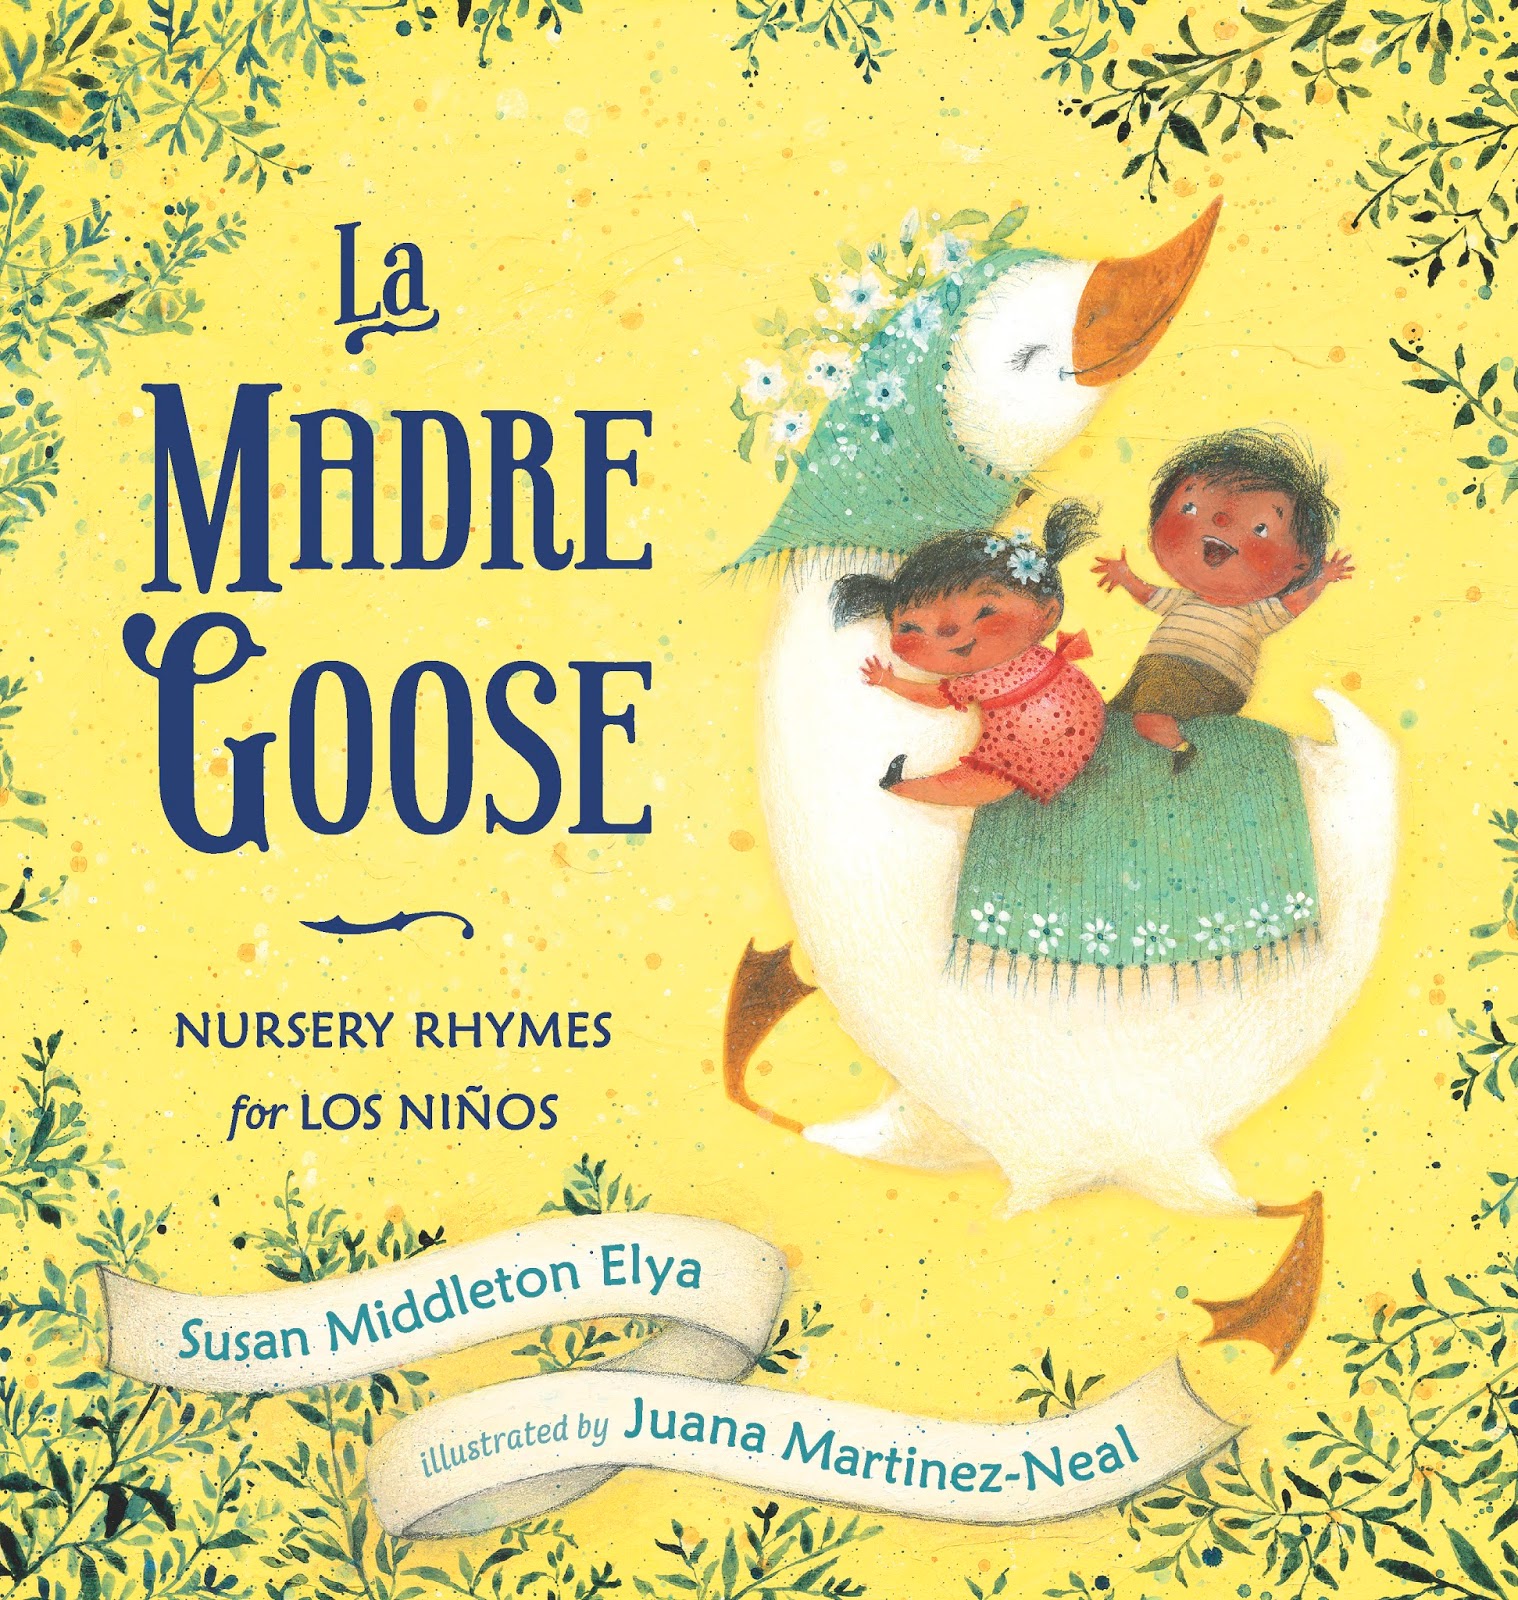 Mother goose